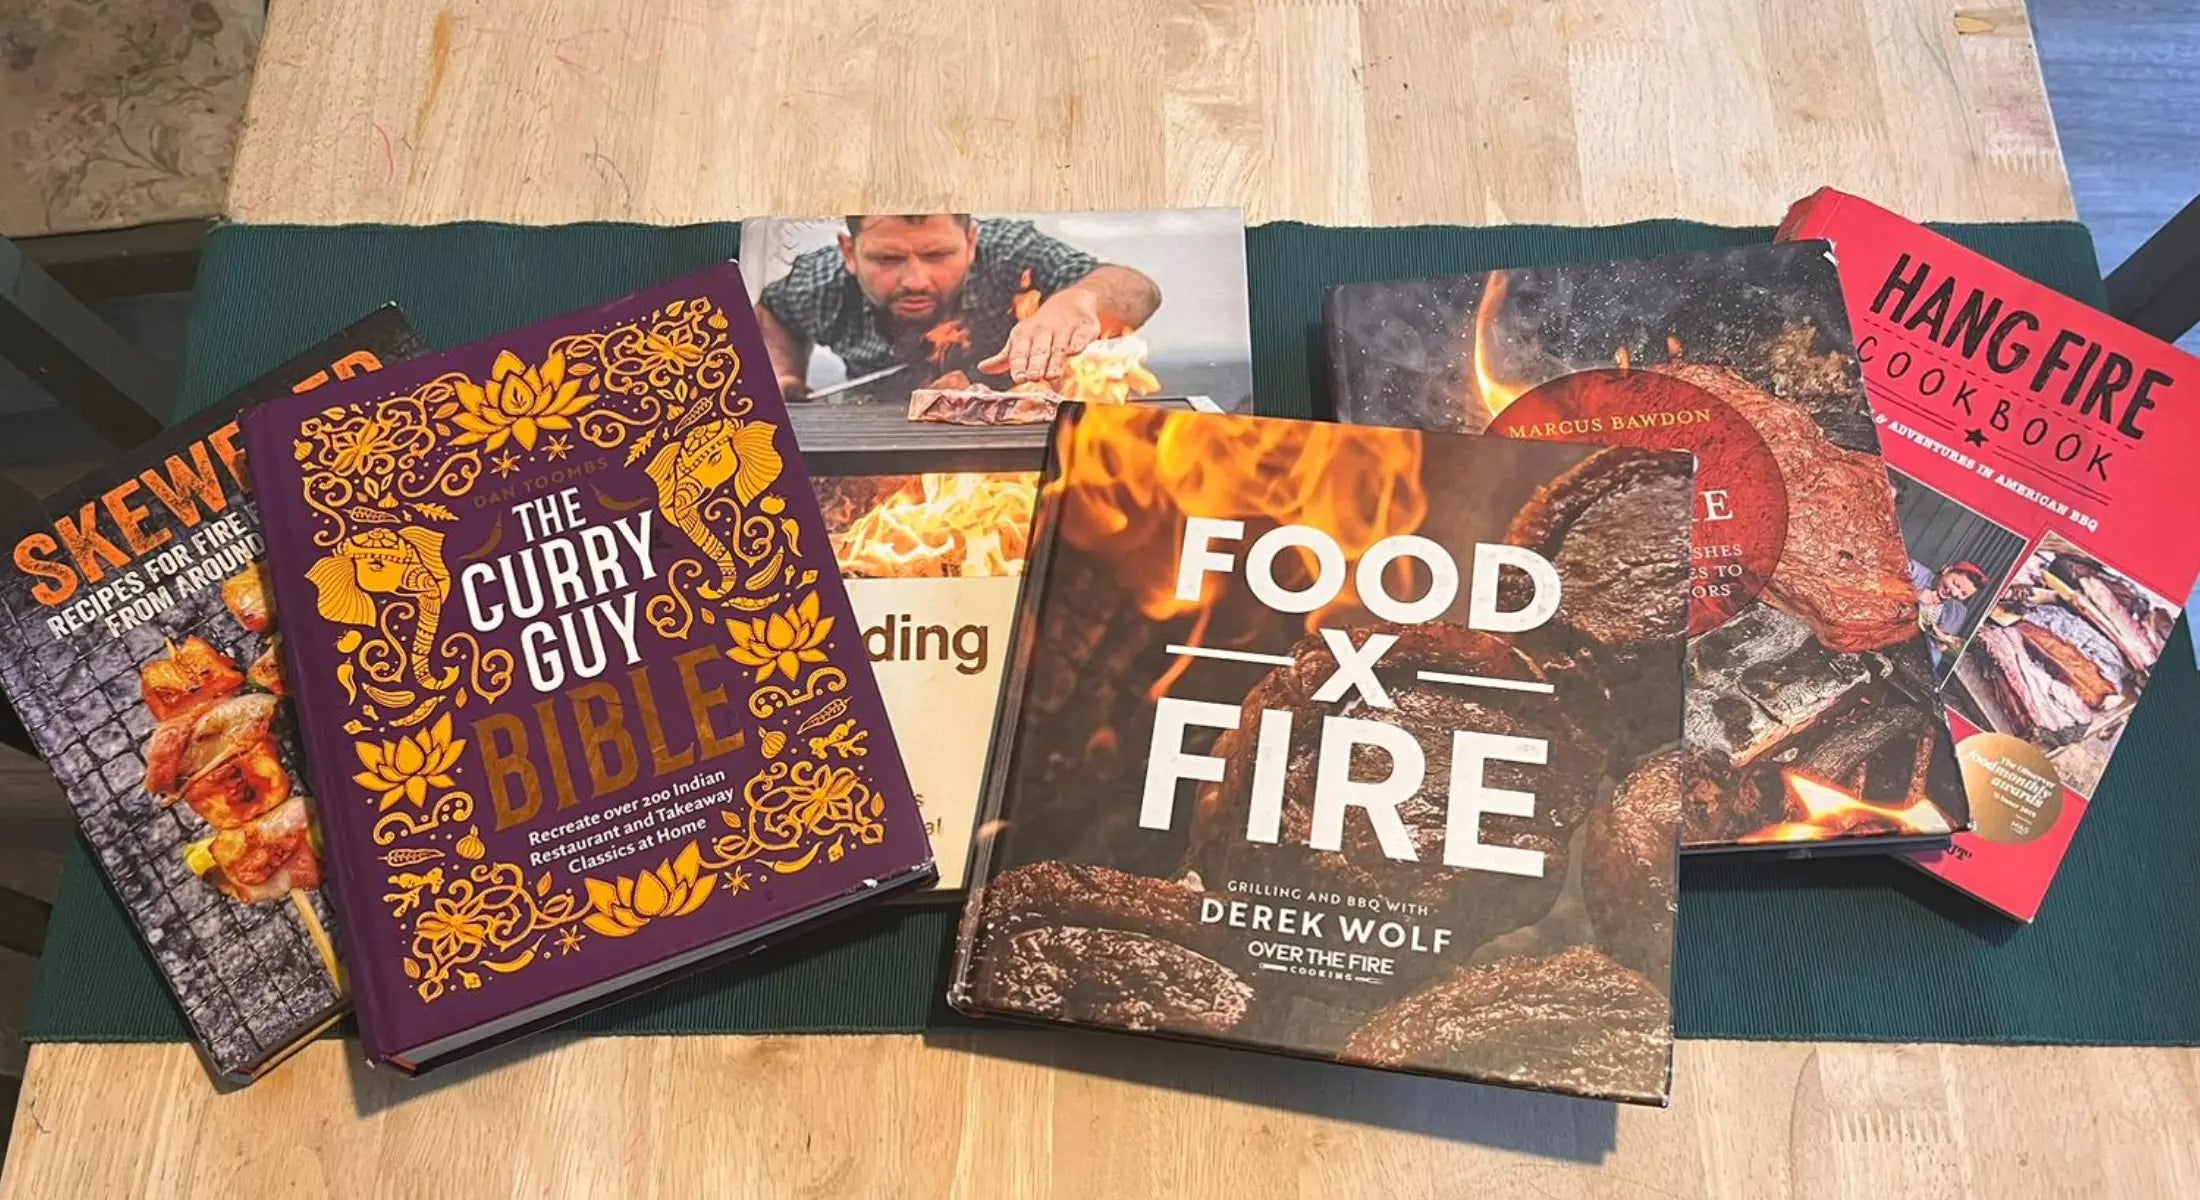 Our Favourite Cookery Books for Wood fired Cooking.